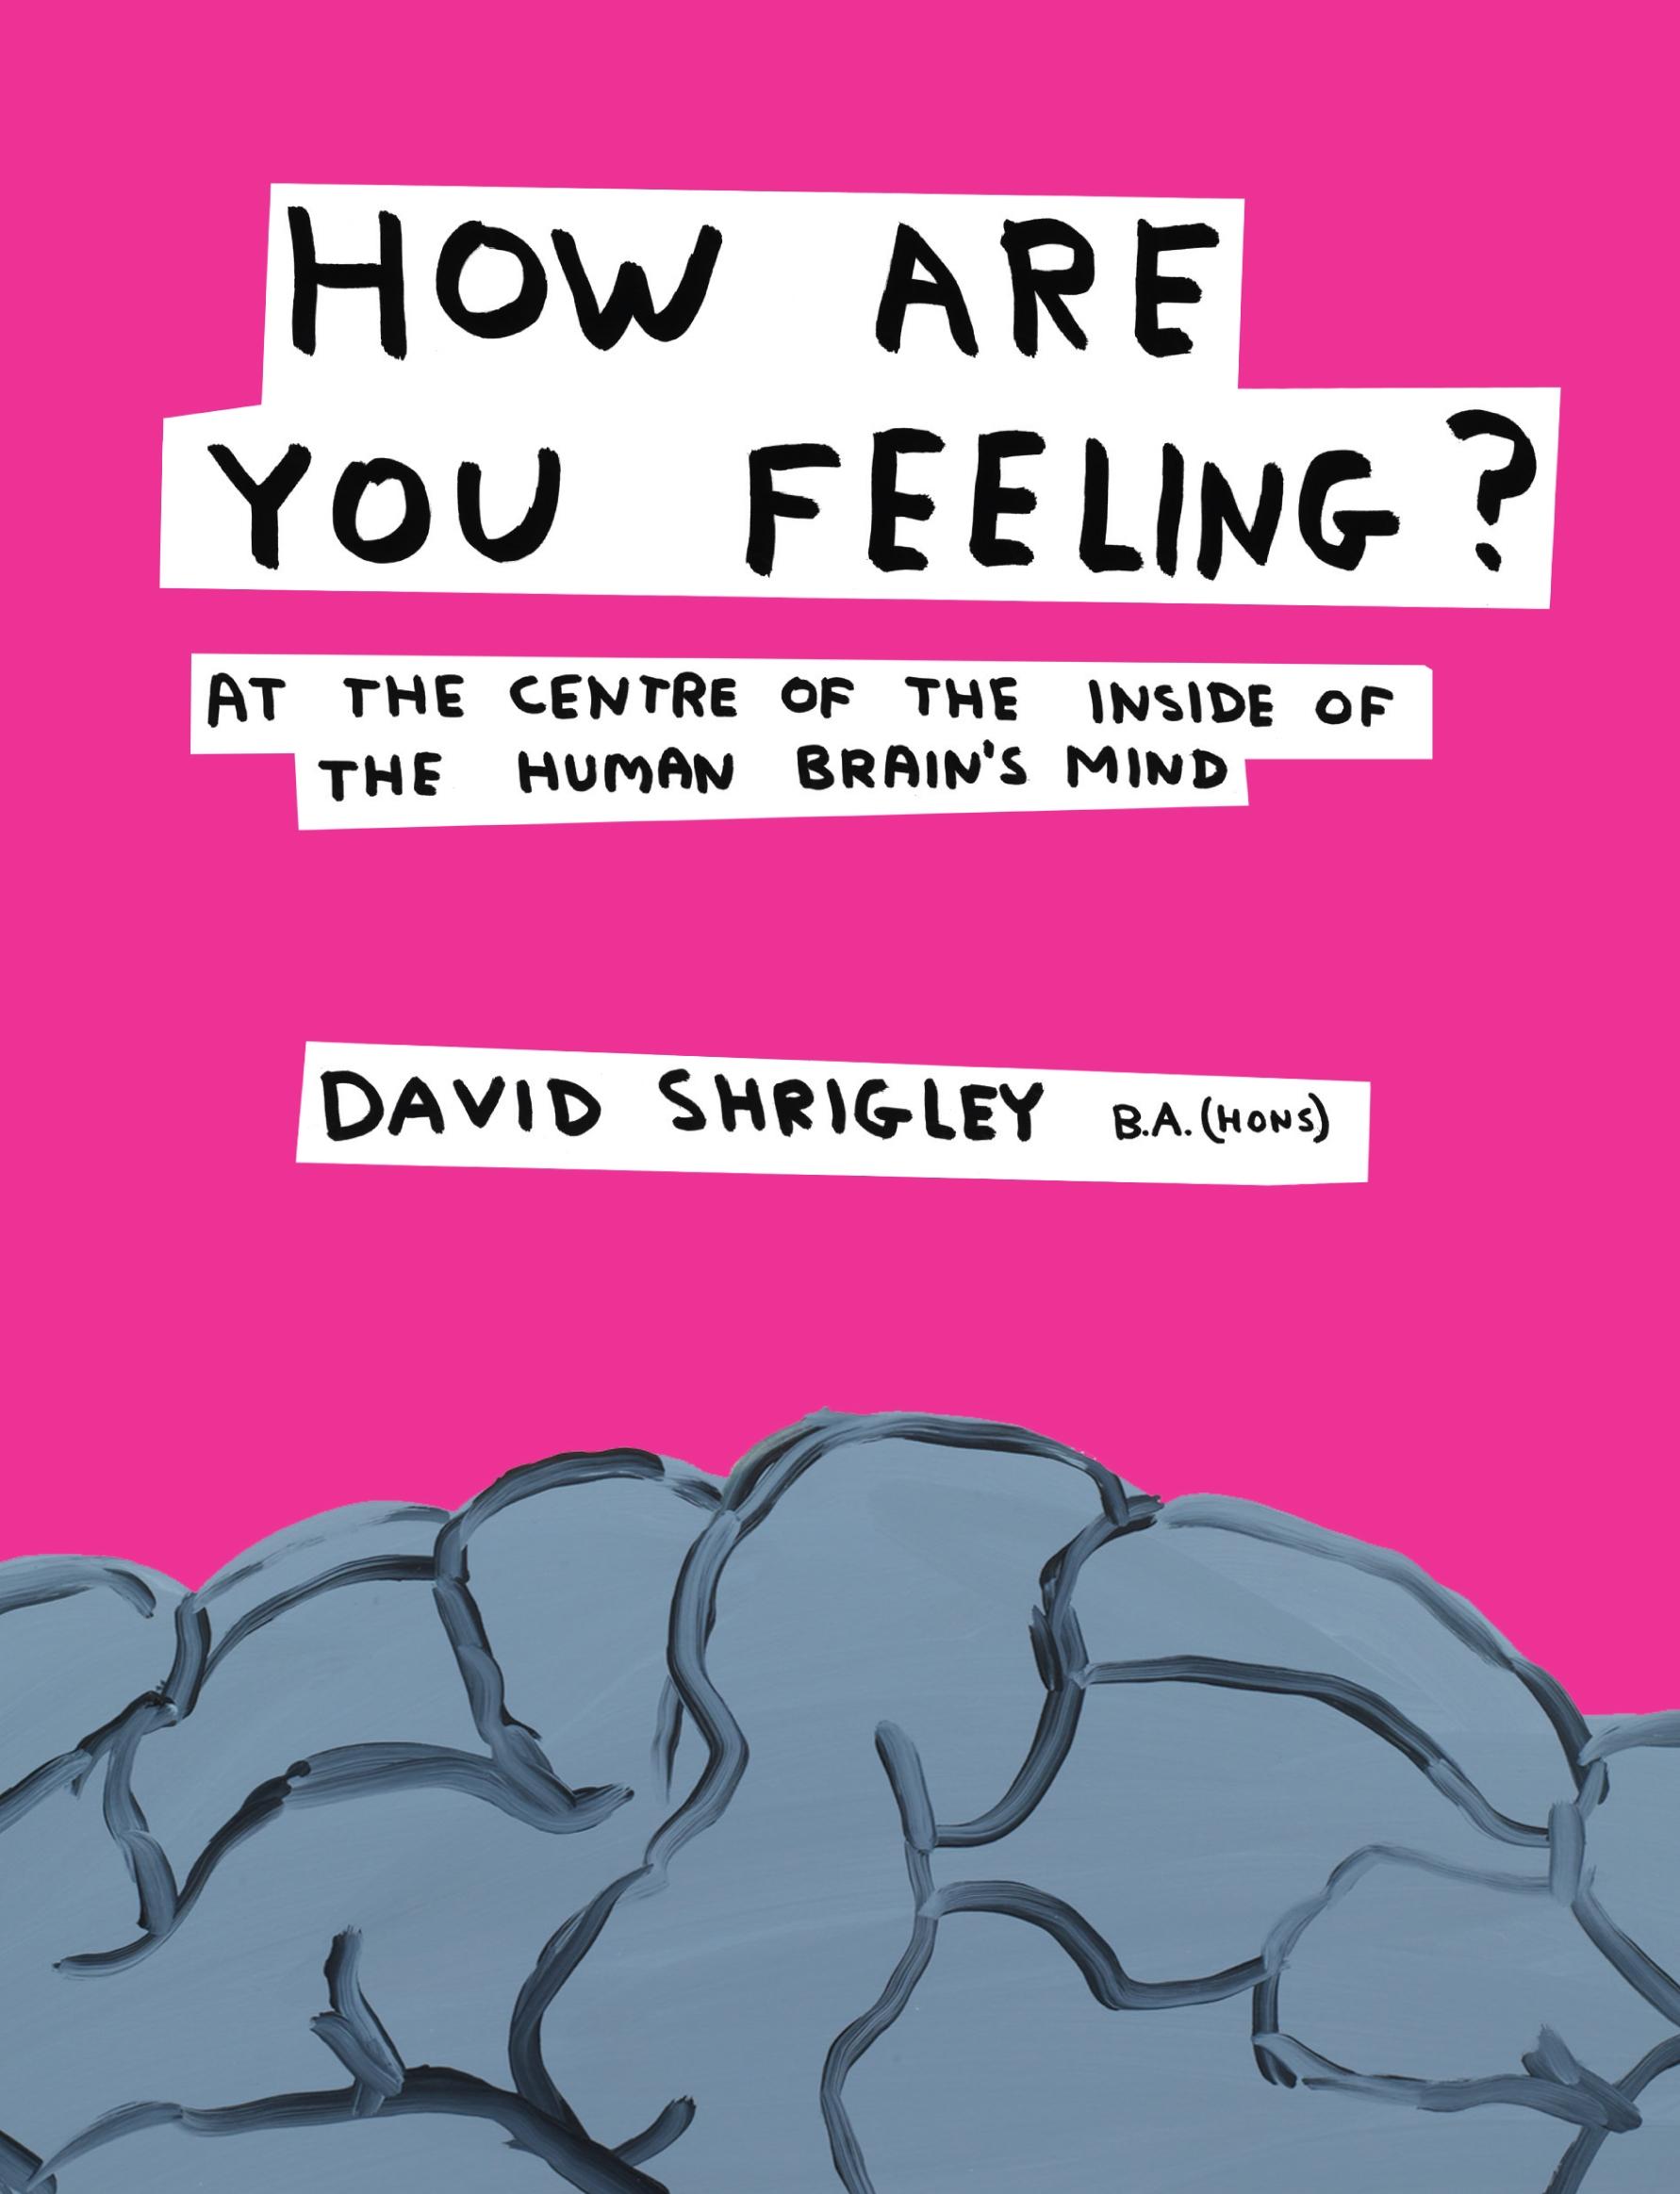 How Are You Feeling? / At the Centre of the Inside of The Human Brain's Mind / David Shrigley / Buch / Gebunden / Englisch / 2012 / Canongate Books / EAN 9780857867216 - Shrigley, David